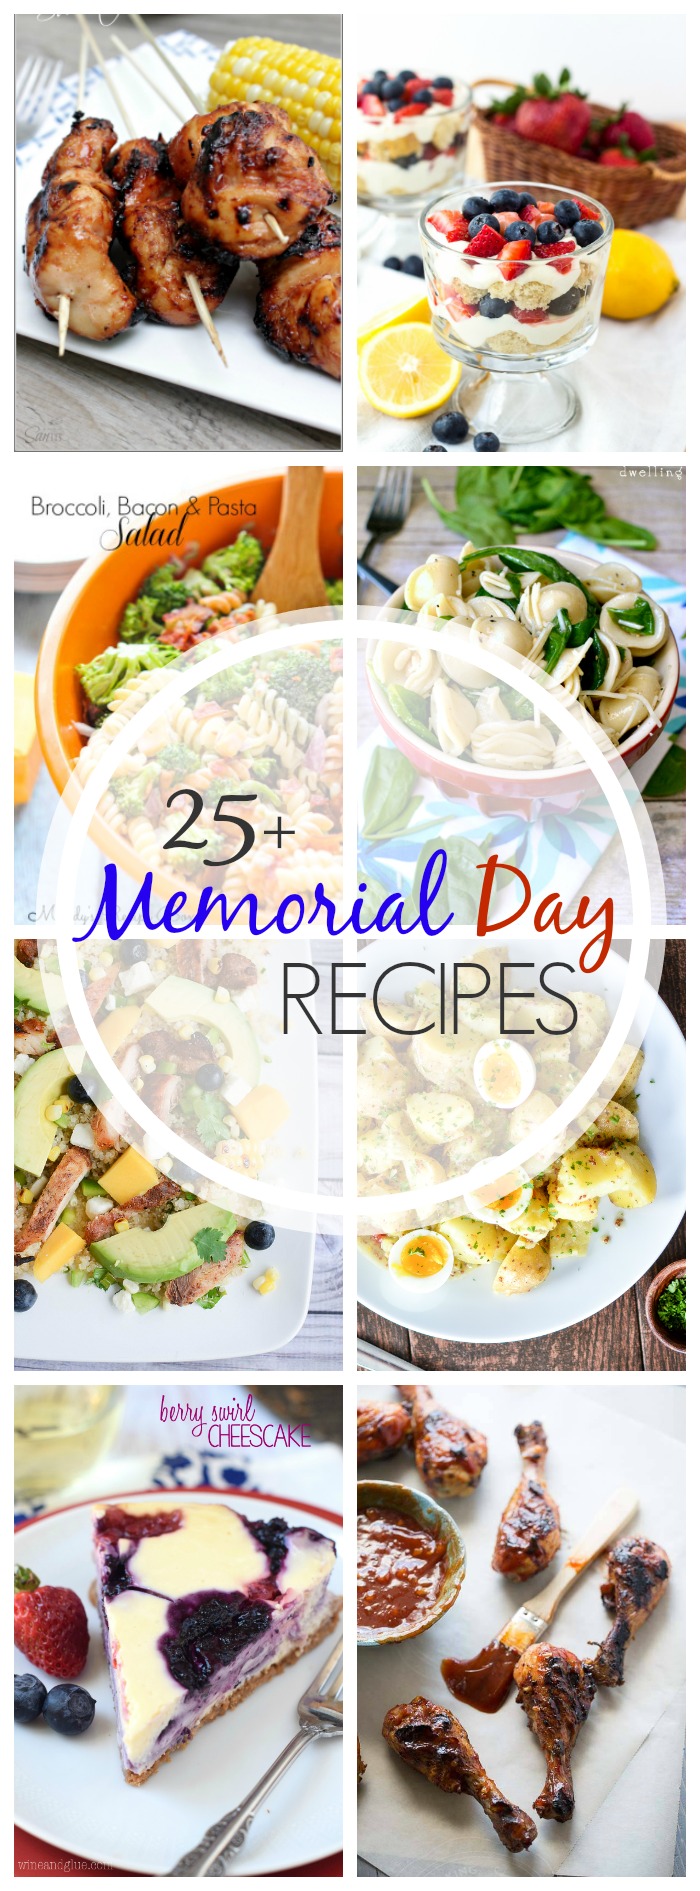 Planning a barbecue for Memorial Day weekend? Then we've got you covered with these 25+ Recipes for Your Memorial Day Cookout! You'll find everything from appetizers to desserts to keep your crowd happy and satisfied!